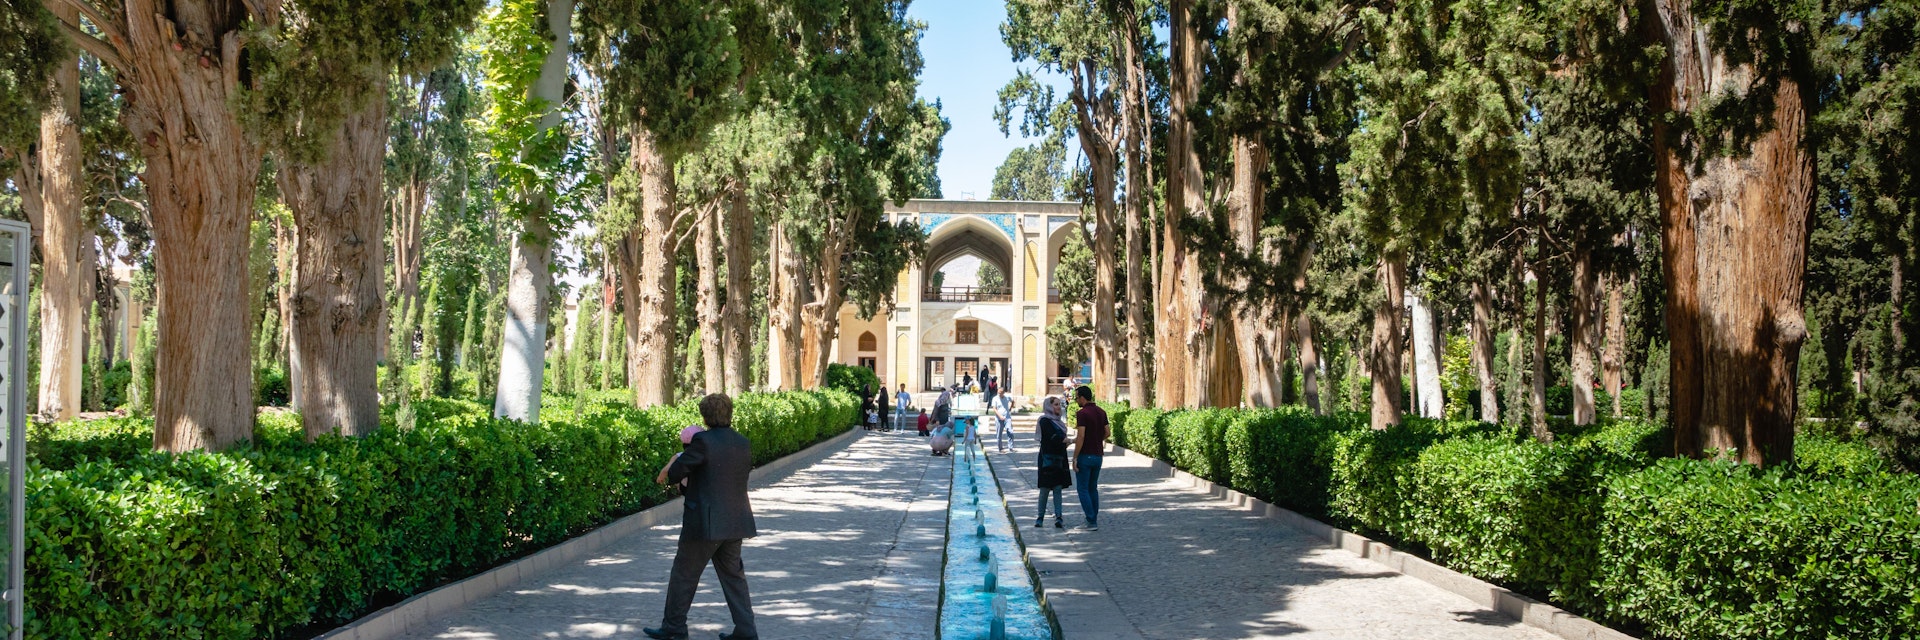 Kashan, Iran - June 2018: Fin Garden in Kashan, Iran  and visitors - Fin Garden is one of the most famous royal gardens in Iran.